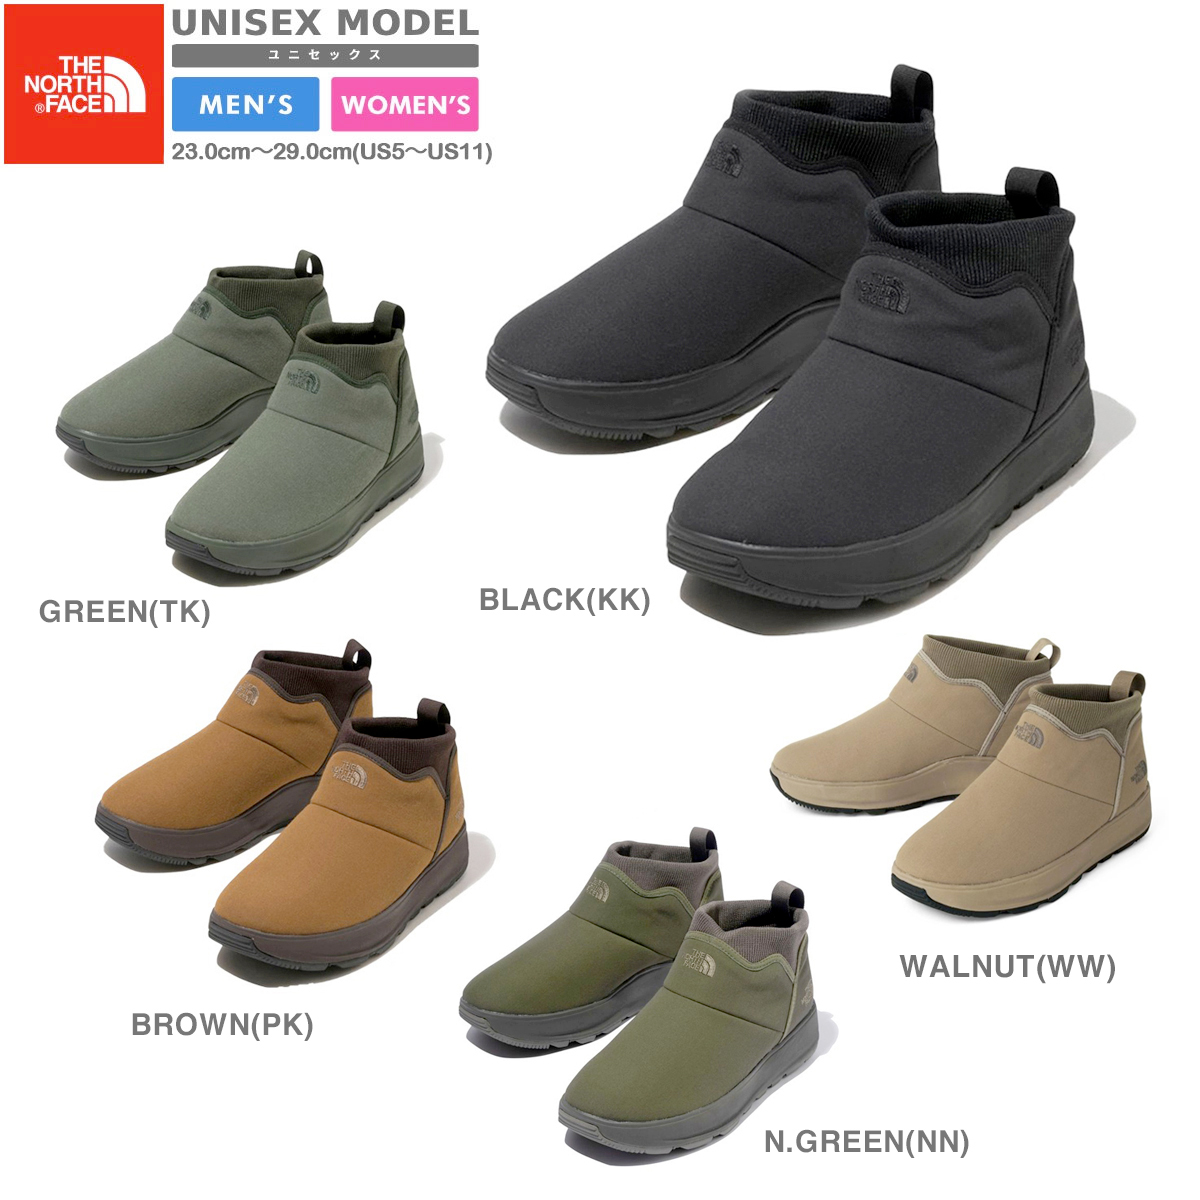 THE NORTH FACE FIREFLY BOOTIE ザ ノース フェイス ファイヤーフライ ブーティー NF52181 | LOWTEX  PLUS